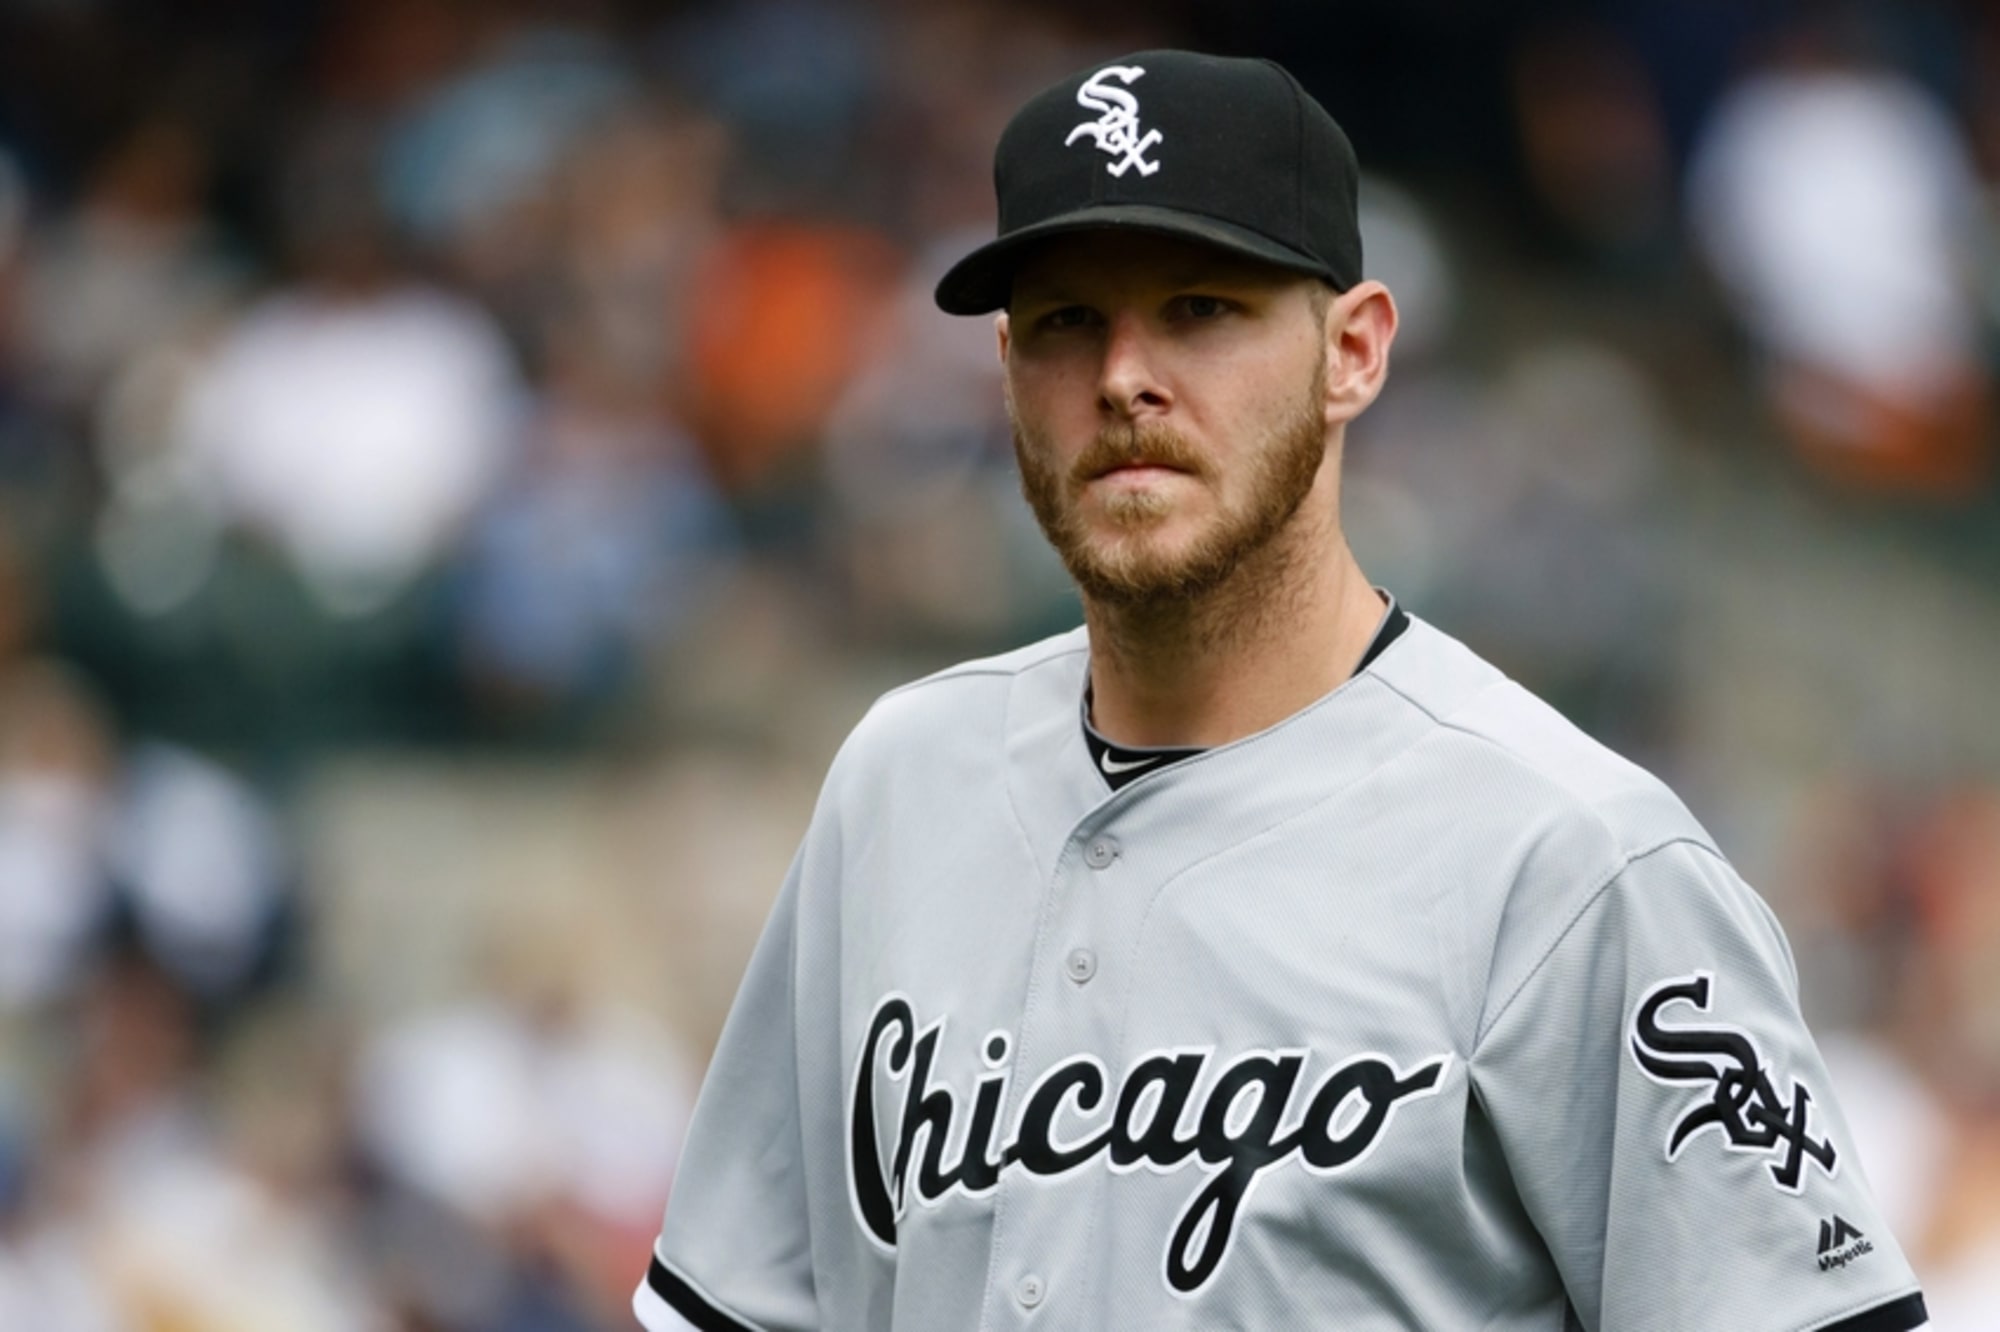 Chicago White Sox: Does Chris Sale trade signal the rebuild?